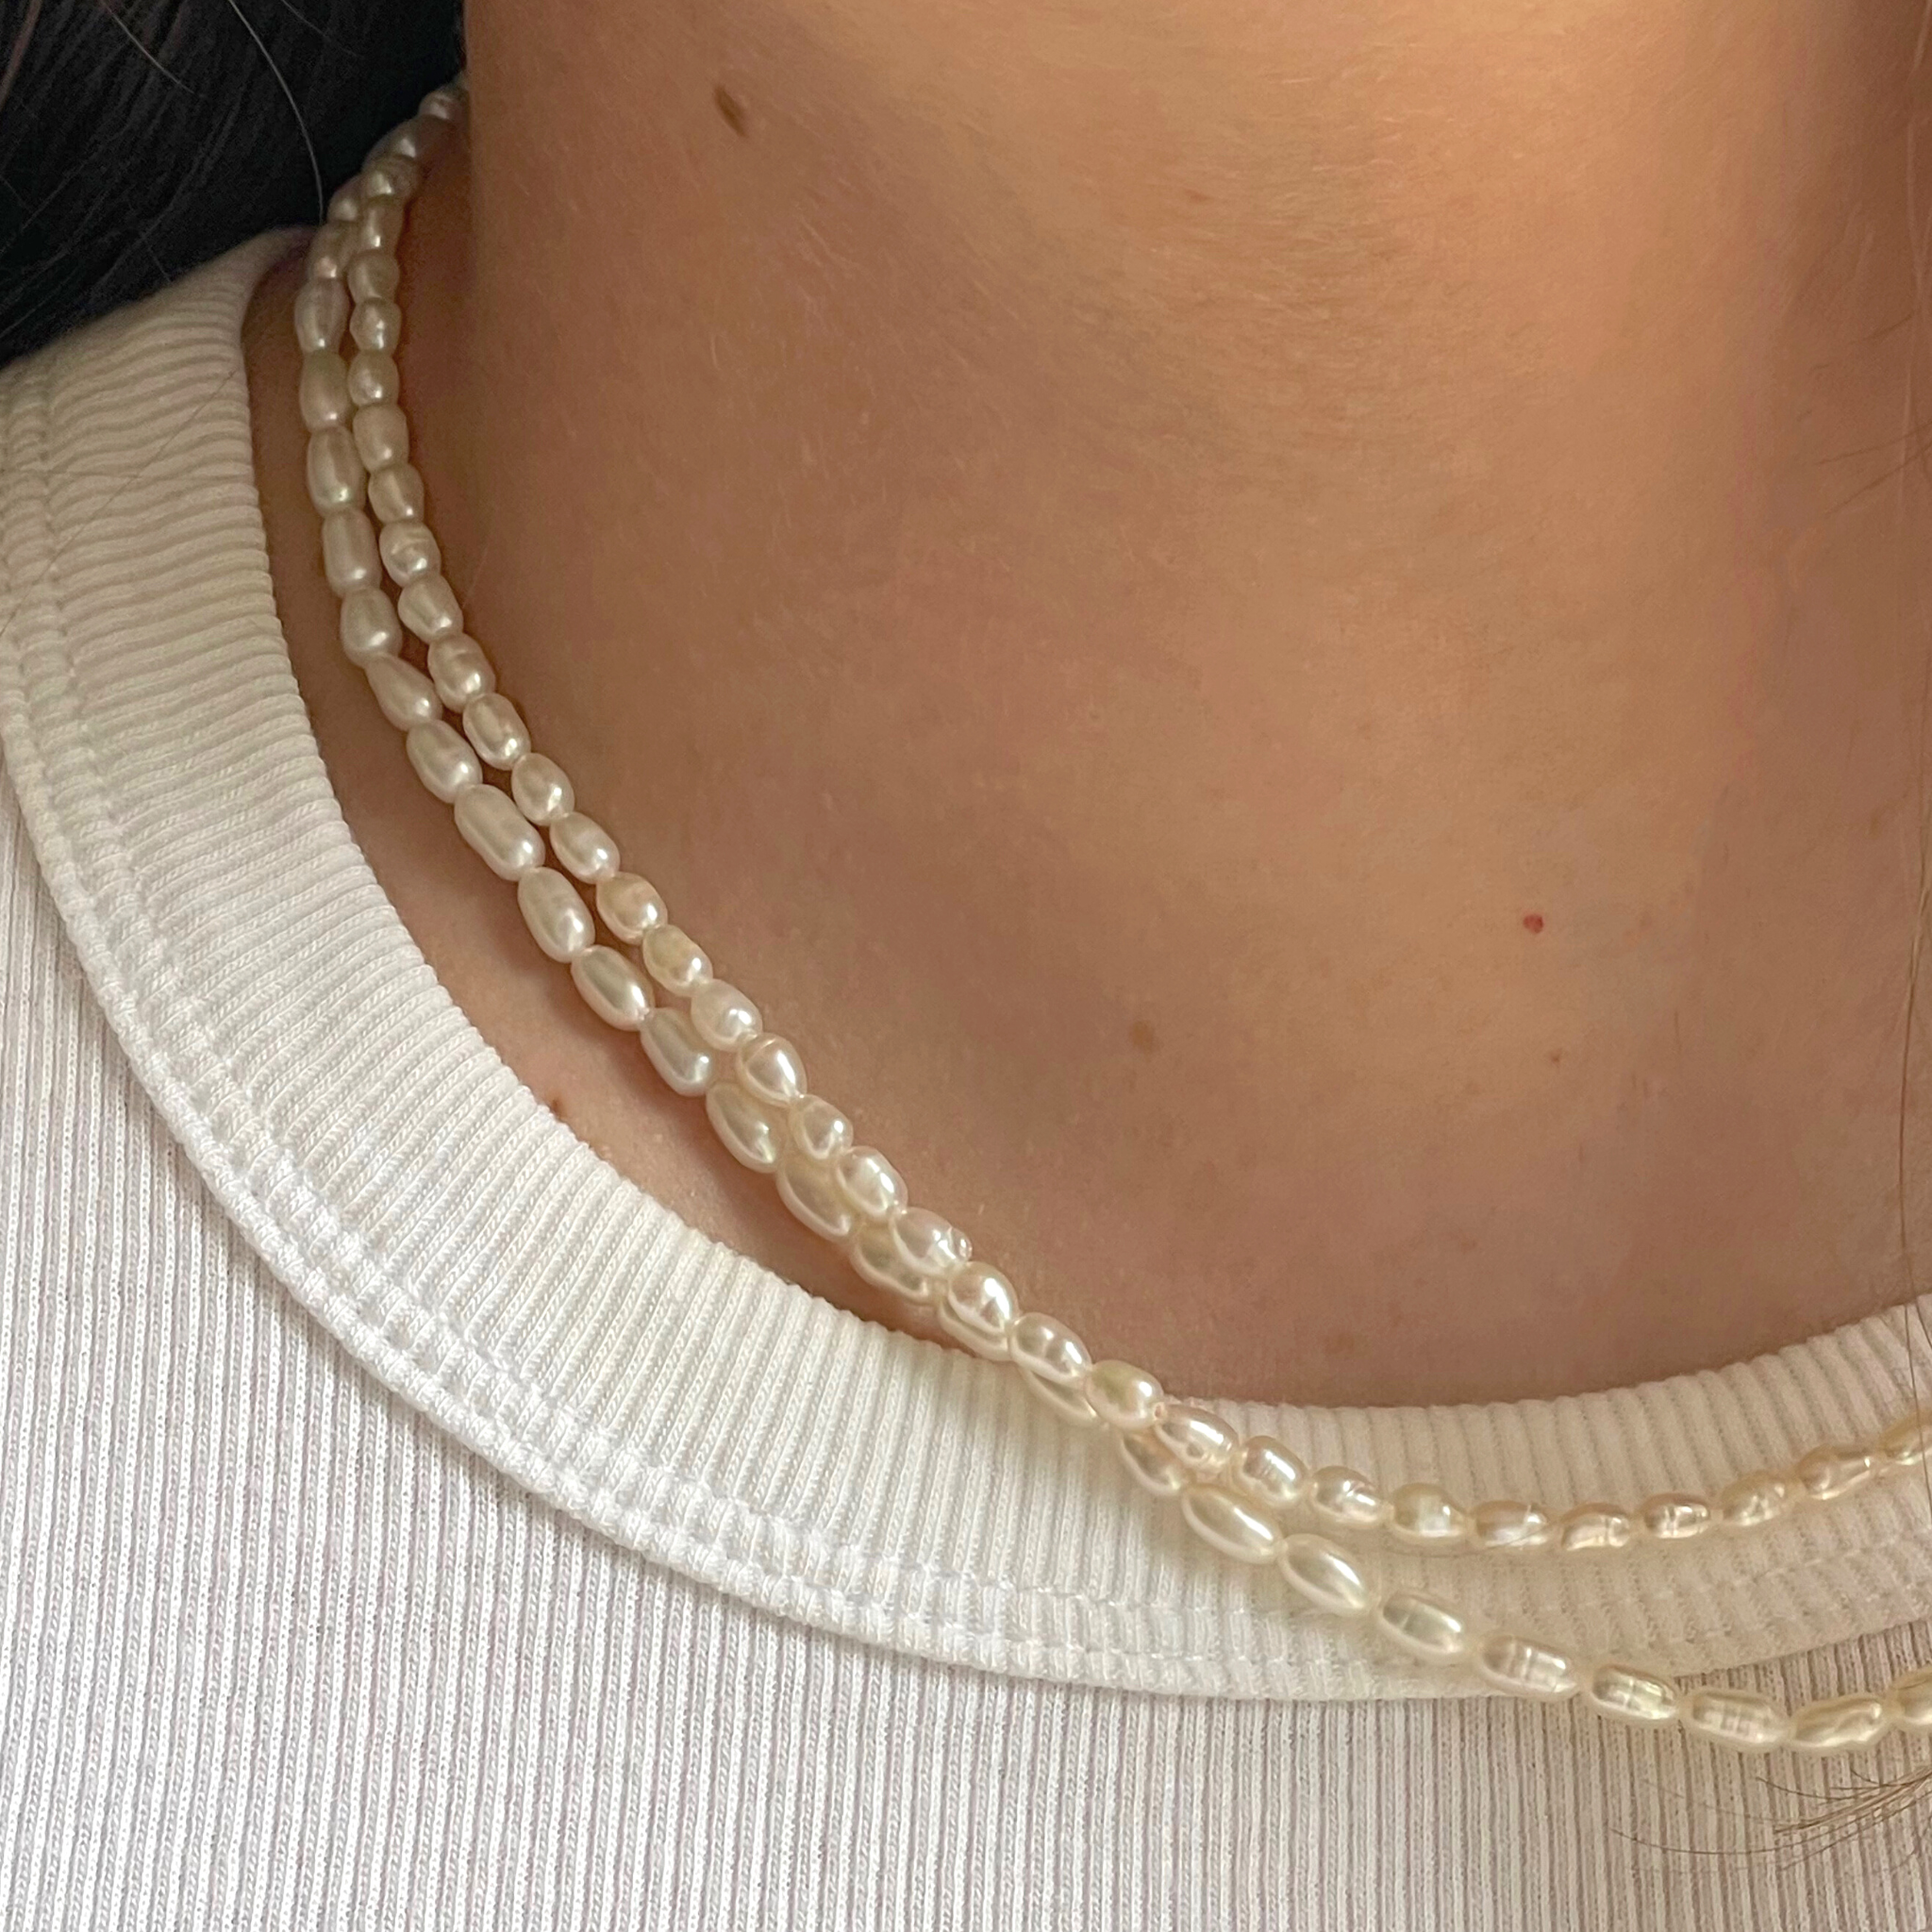 Antique seed pearl necklace restoration | Pearl Education - Pearl-Guide.com